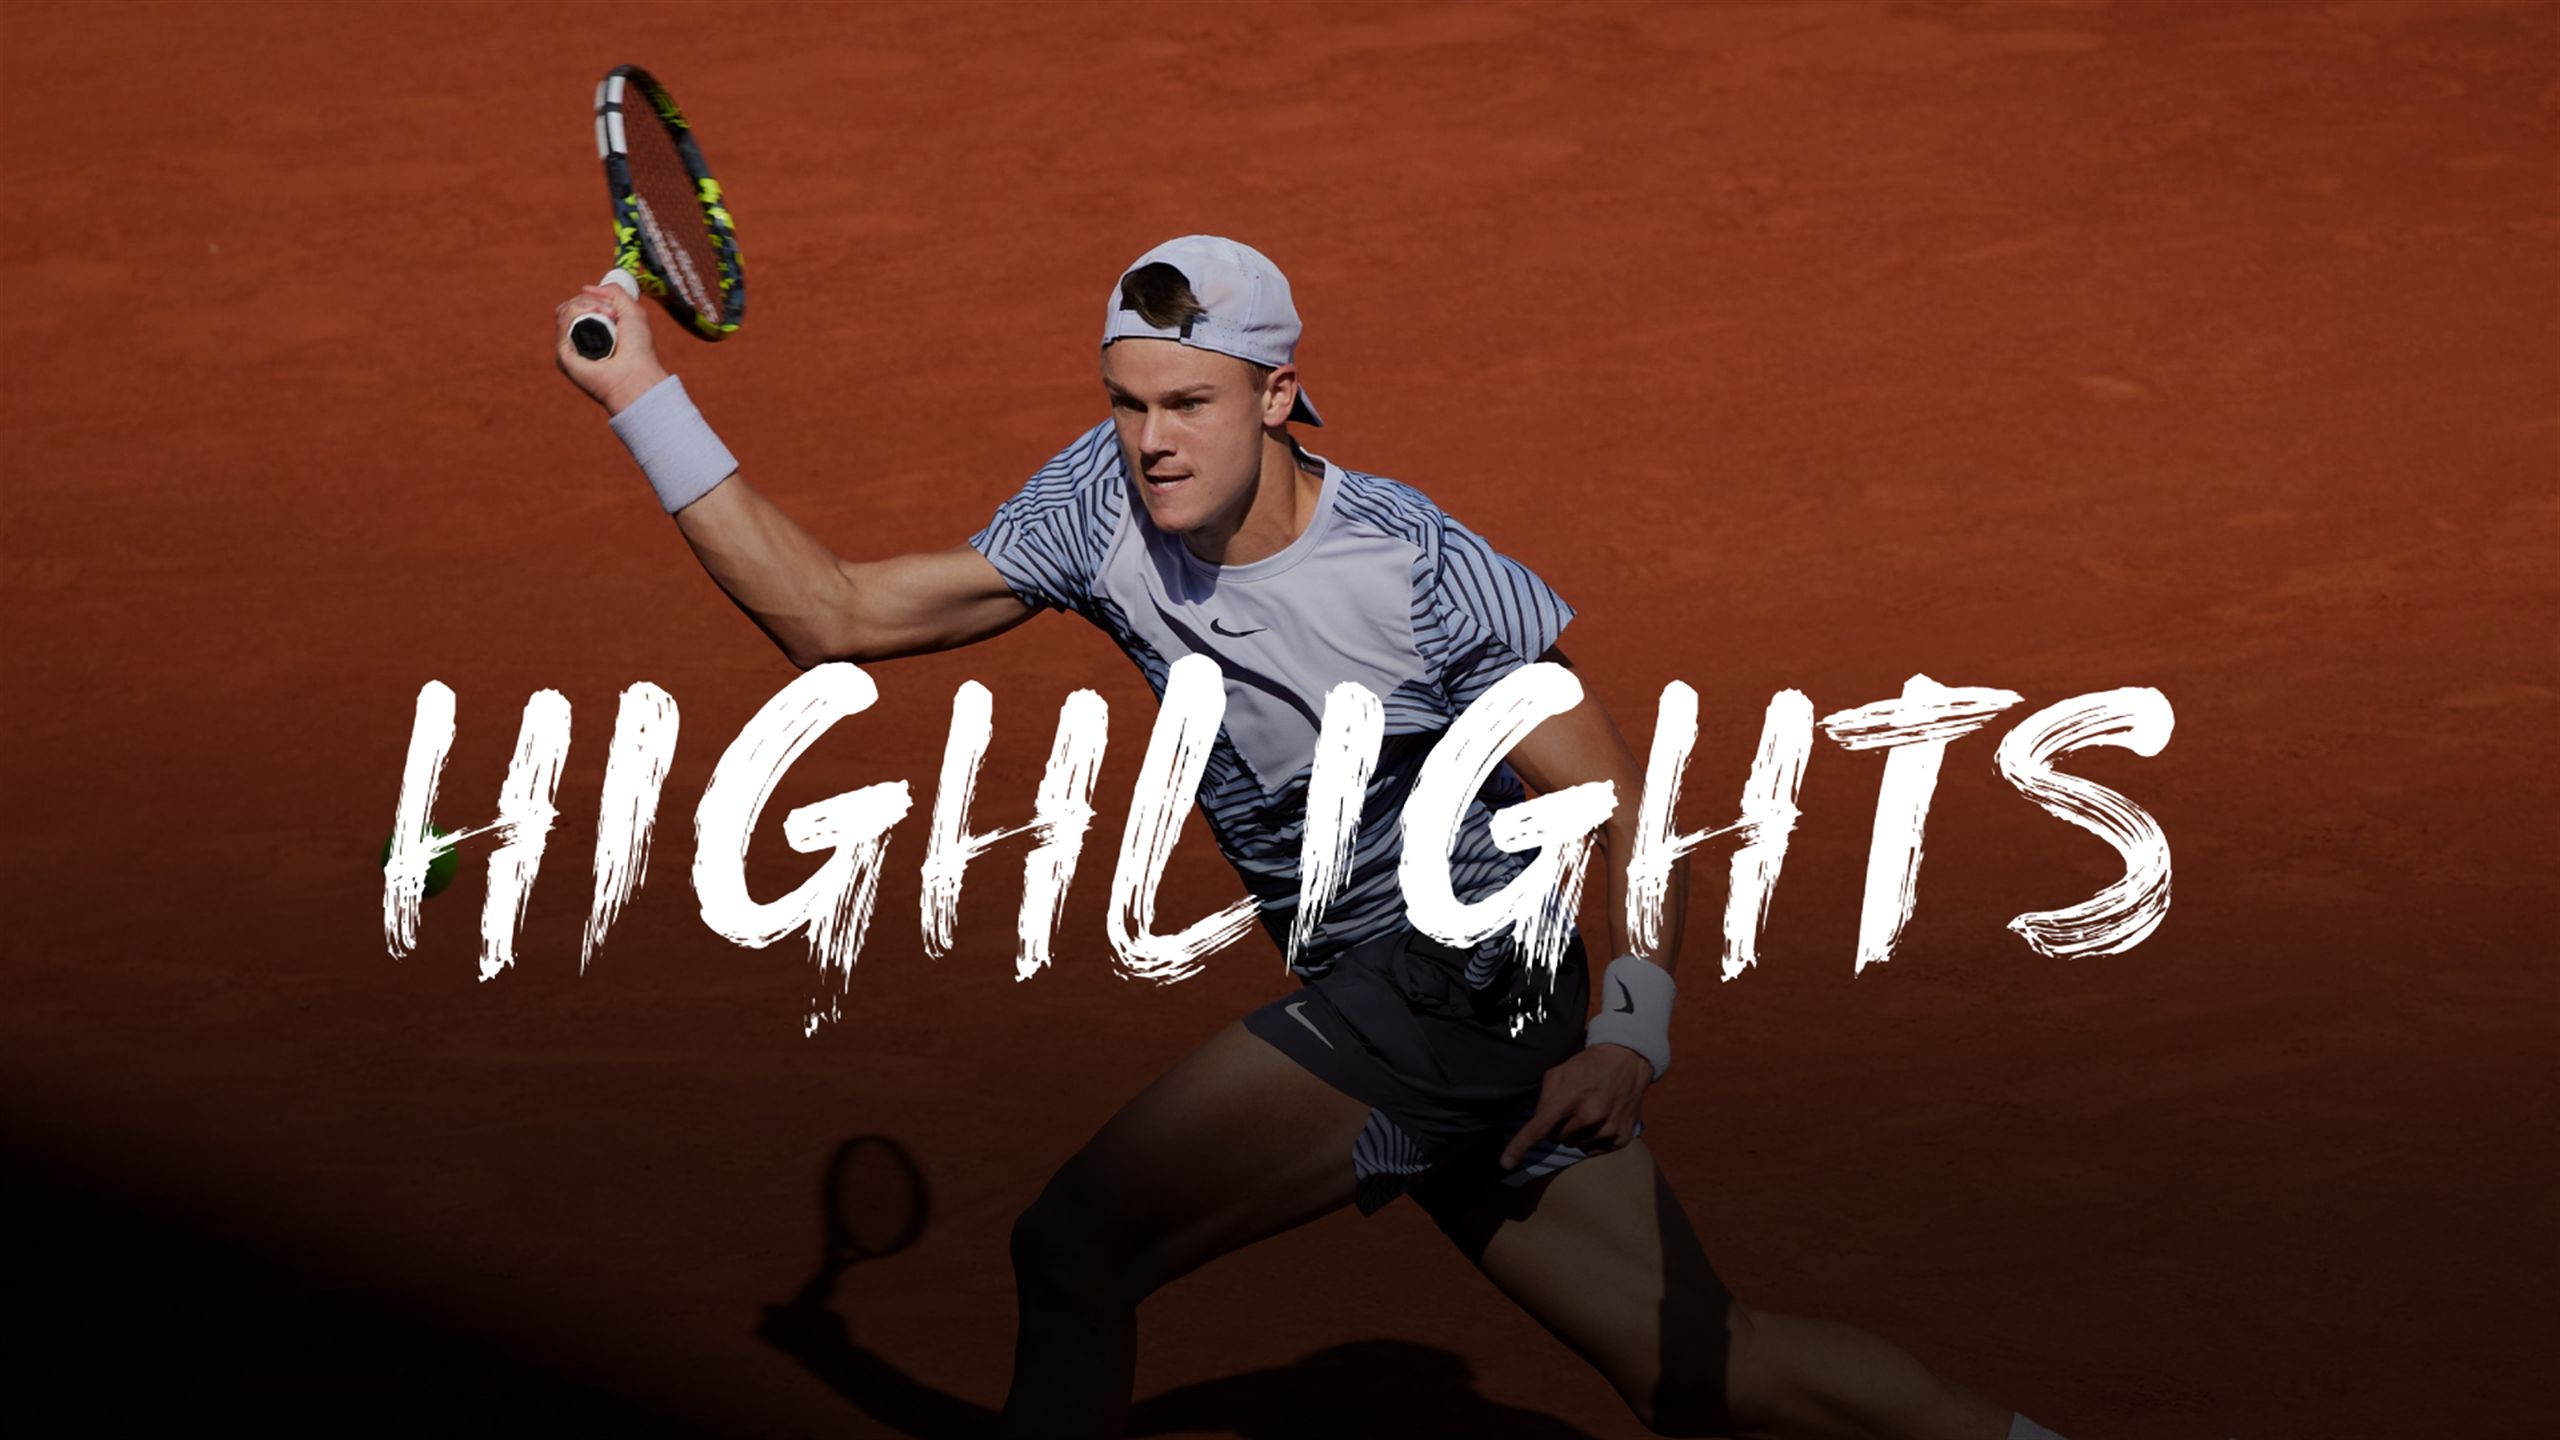 French Open highlights Holger Rune beats Francisco Cerundolo in five-set thriller to reach quarters -finals - Tennis video